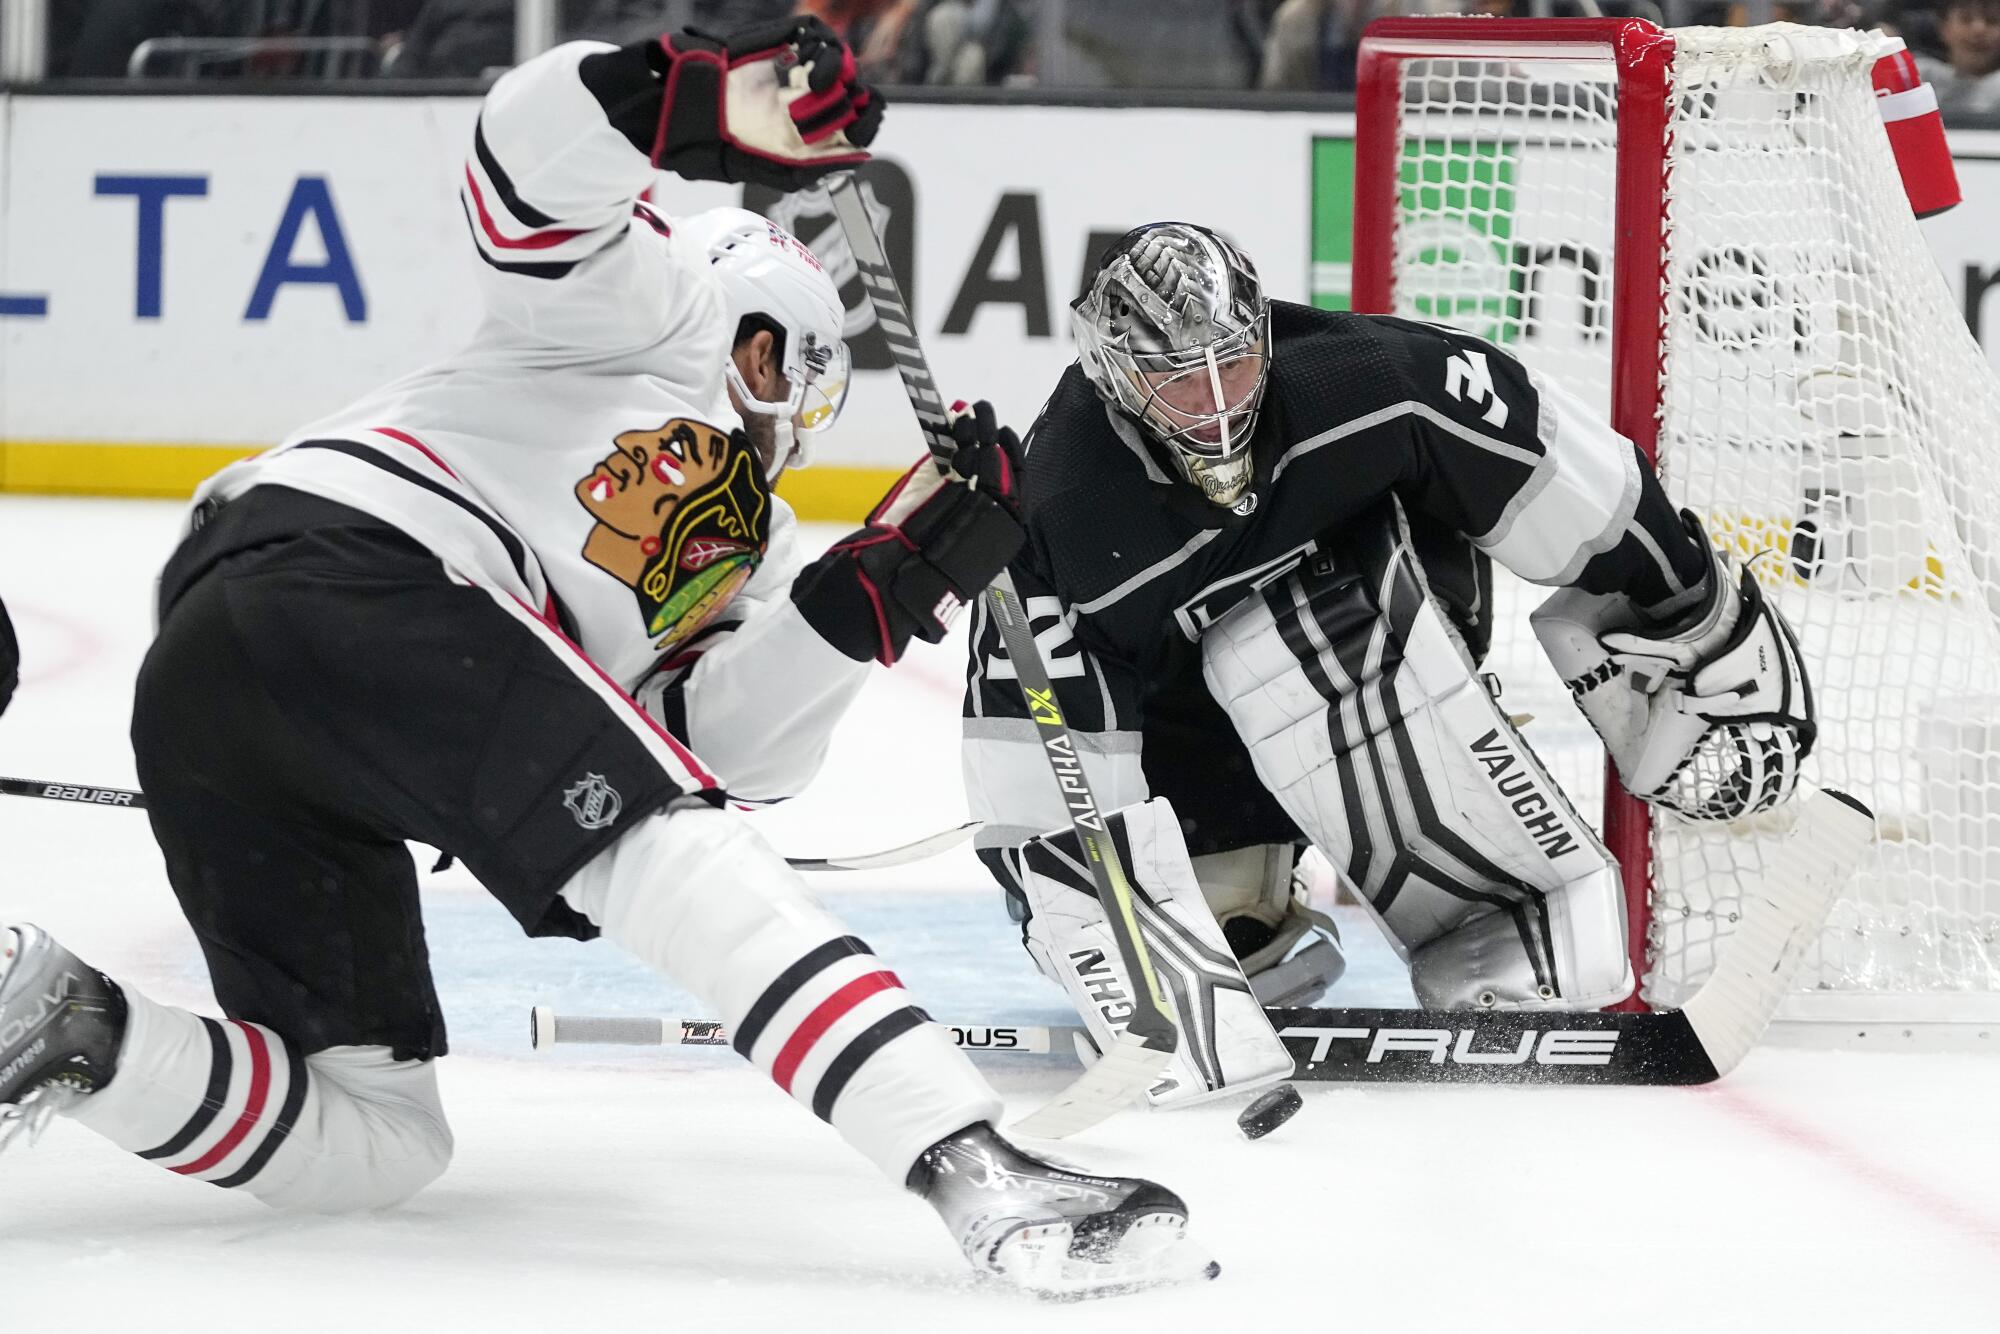 L.A. Kings goalie Jonathan Quick, who rooted against Martin